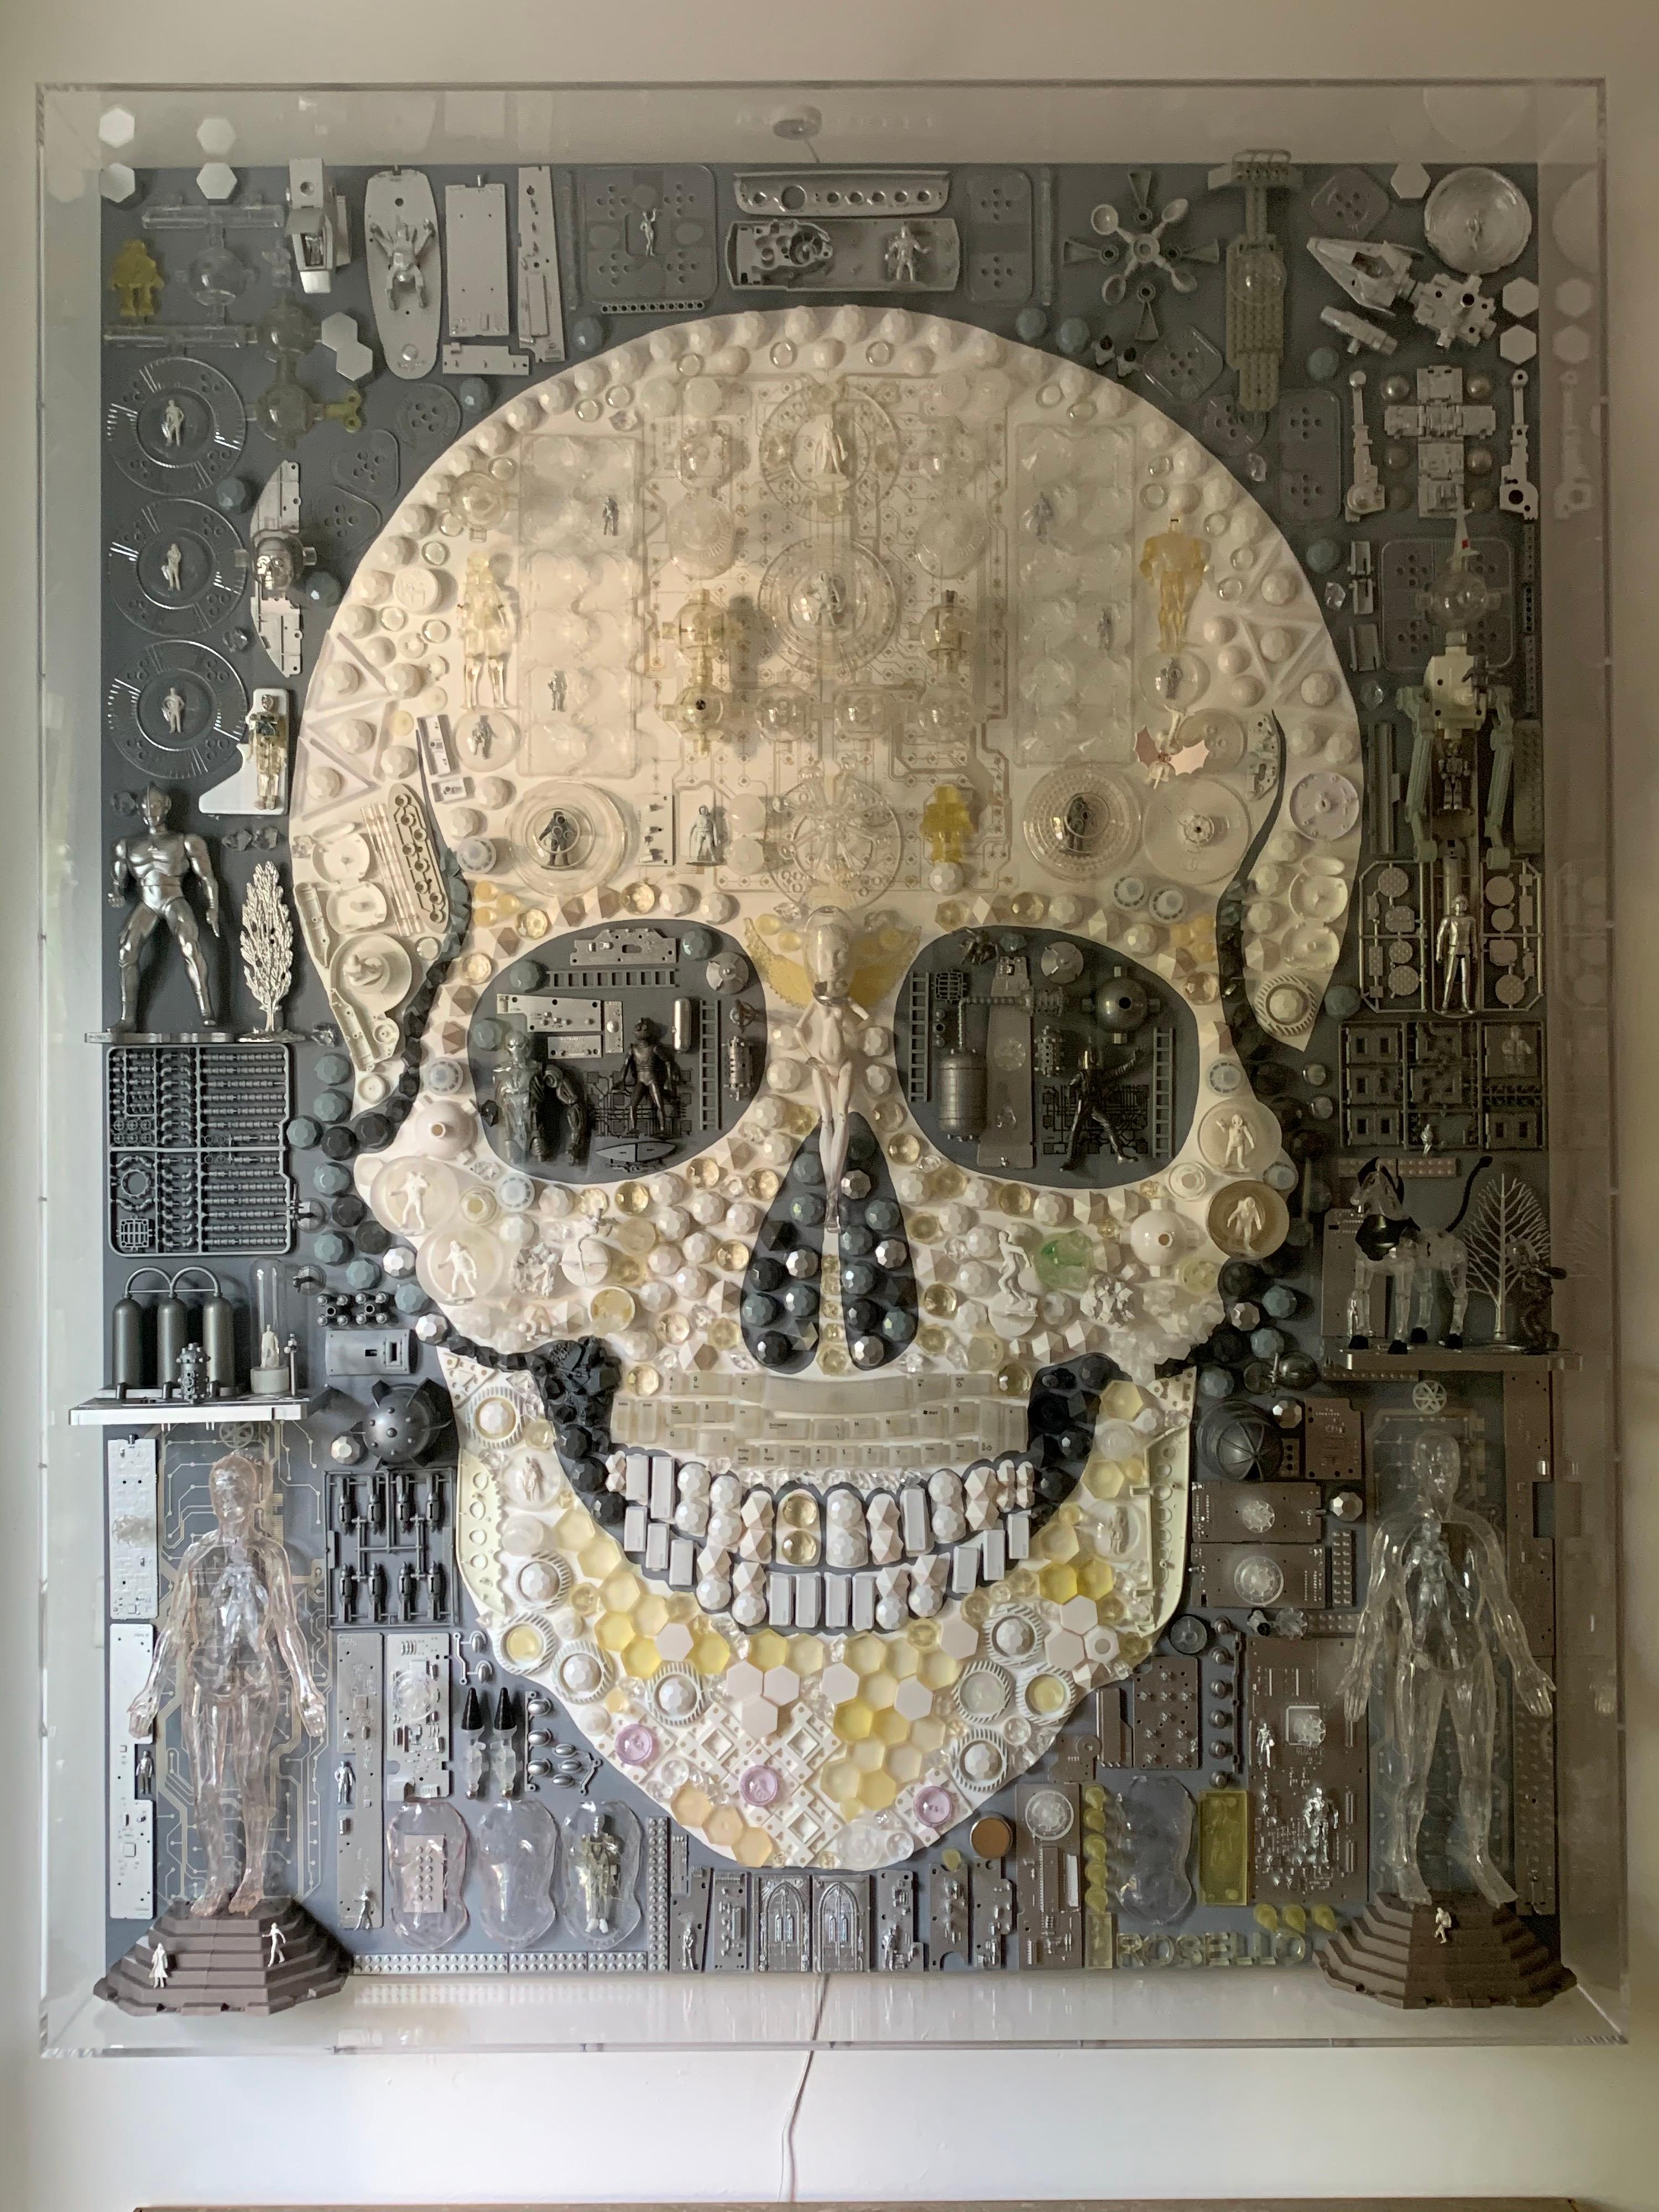 Huge Acrylic Boxed Art by Rosello “Skull” For Sale 8